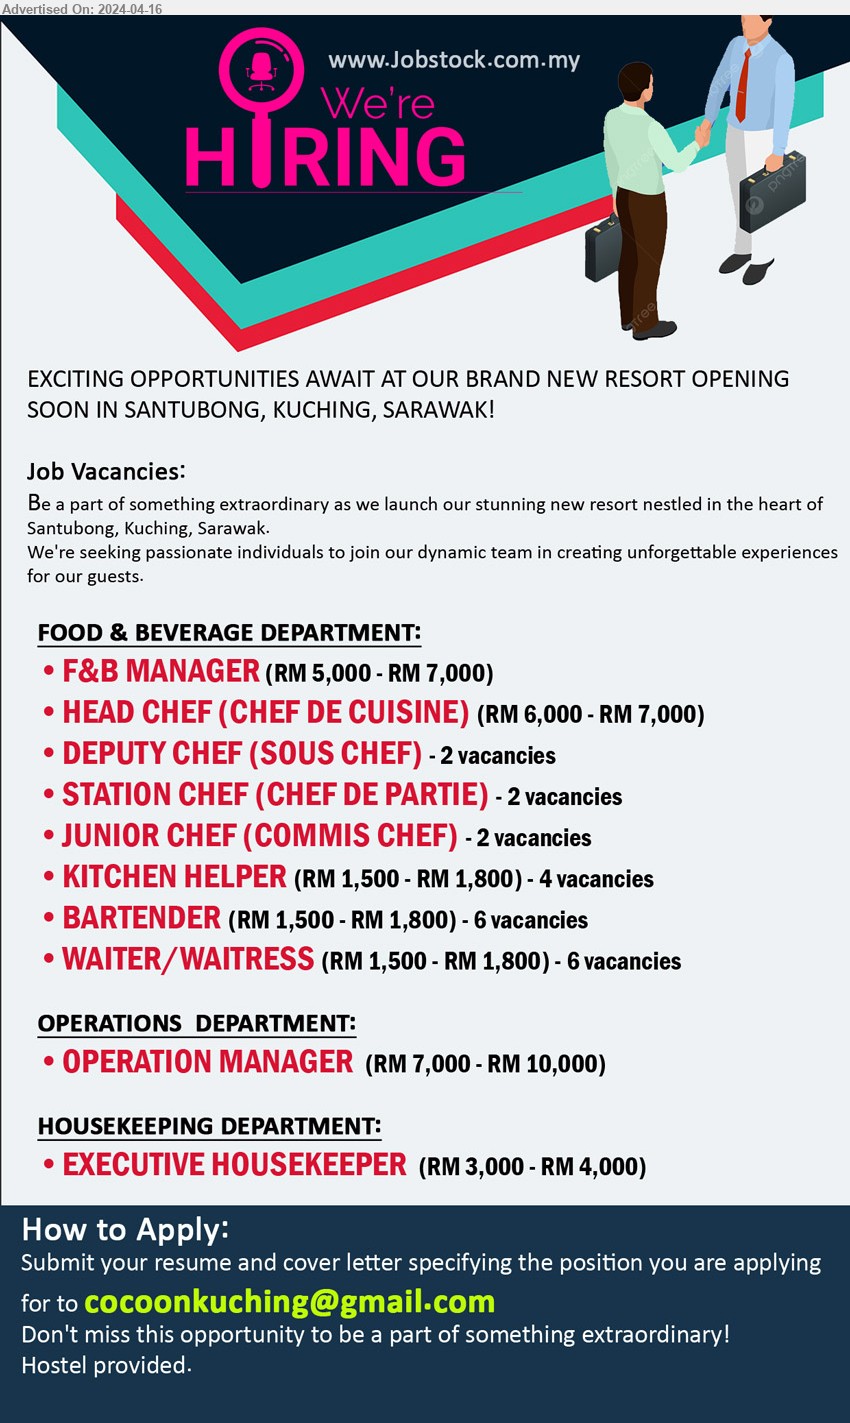 ADVERTISER - 1. F&B MANAGER (RM 5,000.00 - RM 7,000.00 ).
2. HEAD CHEF (CHEF DE CUISINE)  (RM 6,000.00 - RM 7,000.00 ).
3. DEPUTY CHEF (SOUS CHEF)  2 Vacancies.
4. STATION CHEF (CHEF DE PARTIE)  2 Vacancies.
5. JUNIOR CHEF (COMMIS CHEF) 2 Vacancies.
6. KITCHEN HELPER  4 Vacancies. (RM 1,500.00 - RM 1,800.00)
7. BARTENDER   6 Vacancies. (RM 1,500.00 - RM 1,800.00)
8. WAITER/WAITRESSs 6 Vacancies. (RM 1,500.00 - RM 1,800.00)
9. OPERATION MANAGER   (RM 7,000.00 - RM 10,000.00 ).
10. EXECUTIVE HOUSEKEEPER (RM 3,000.00 - RM 4,000.00 ).
Location: New Resort Opening Soon in Santubong, Kuching.
Email resume to ...